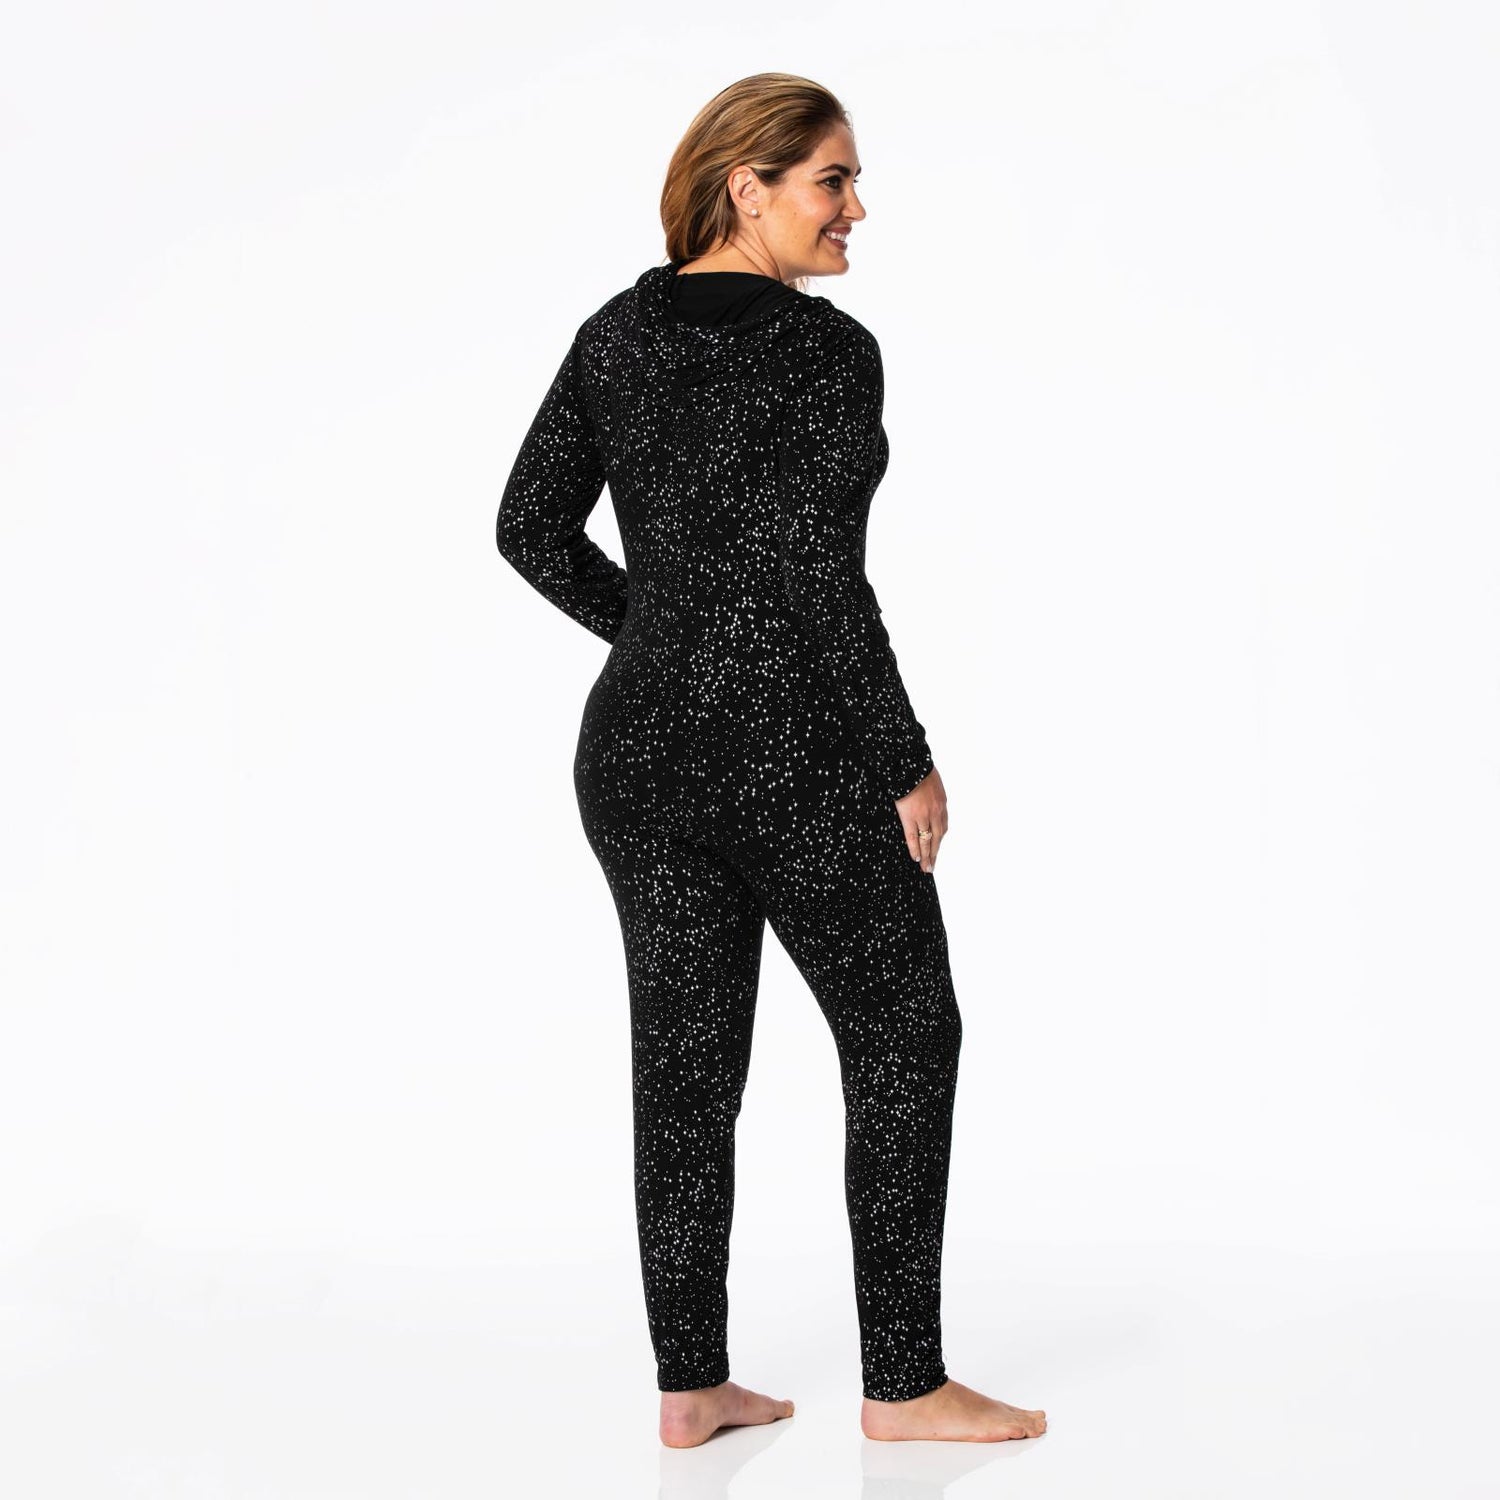 Women's Print Long Sleeve Jumpsuit with Hood in Midnight Foil Constellations